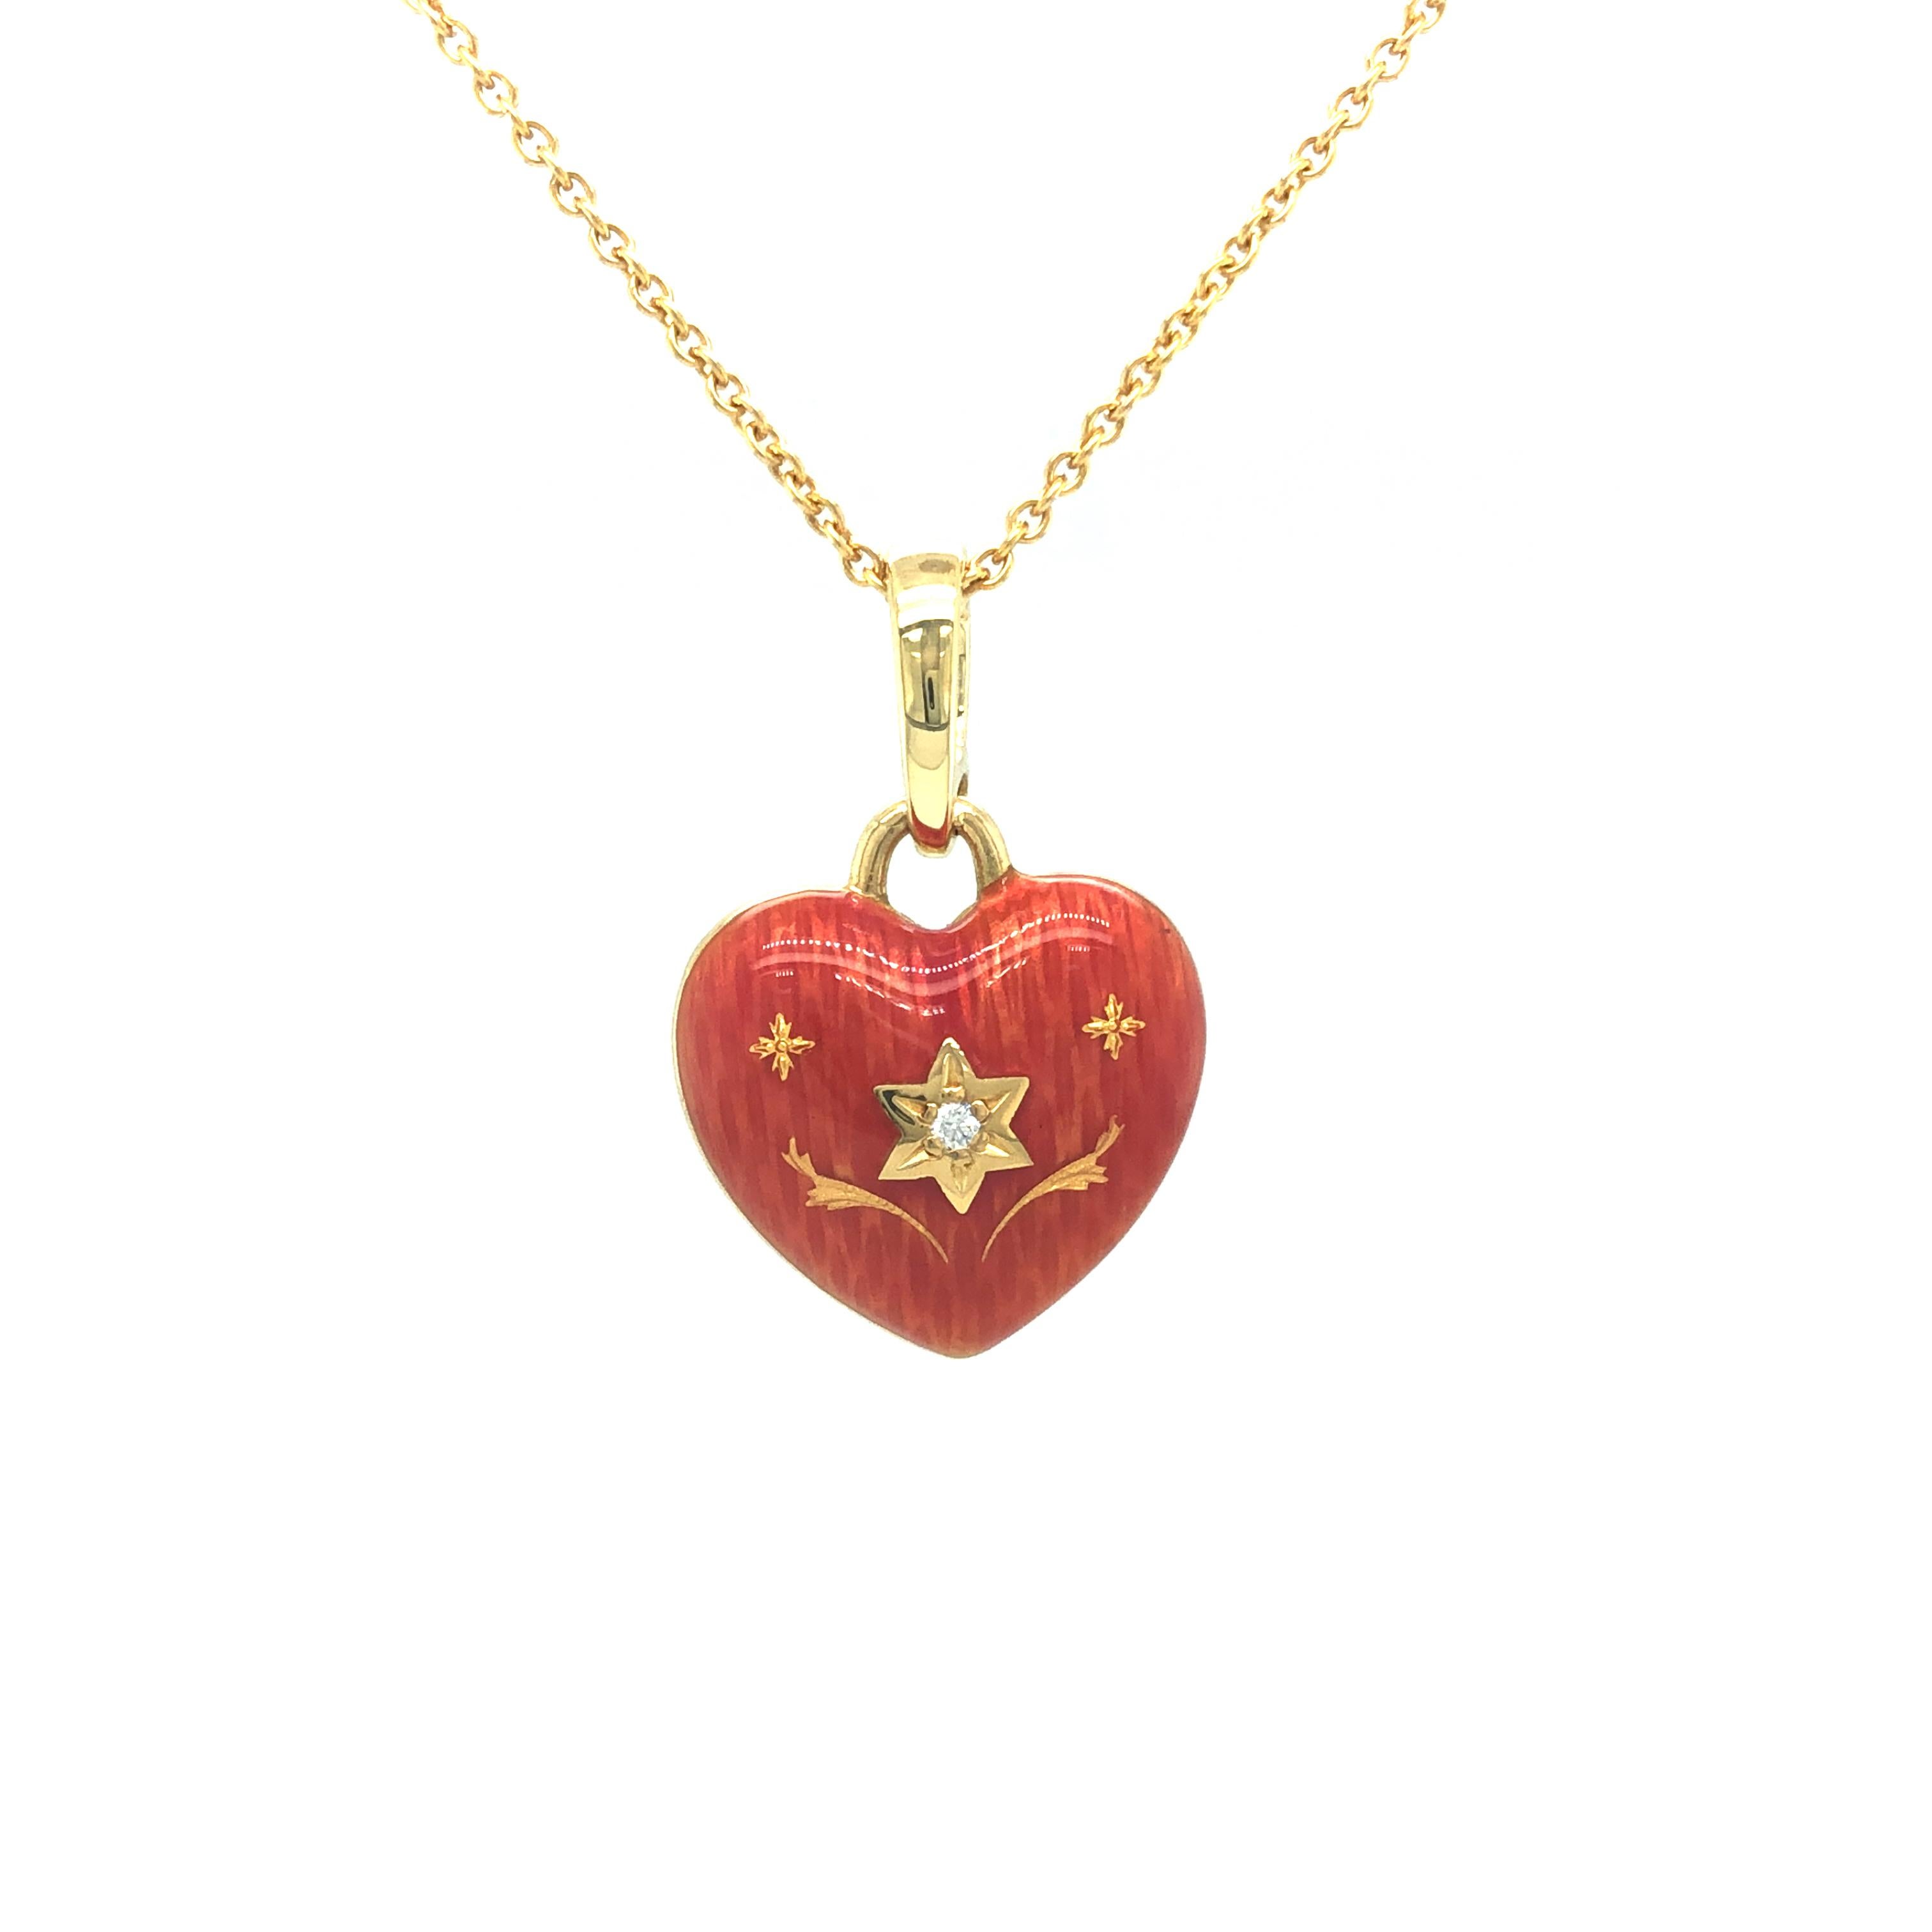 Fabergé heart pendant necklace, 18k yellow gold,  pink translucent enamel with four so-called paillons, 1 brilliant cut diamond 0.015 ct G VS, 45 cm


Reference: F1717/J1/00/00/102
Brand: Faberge
Workmaster: Victor Mayer
Material: 750/- yellow gold